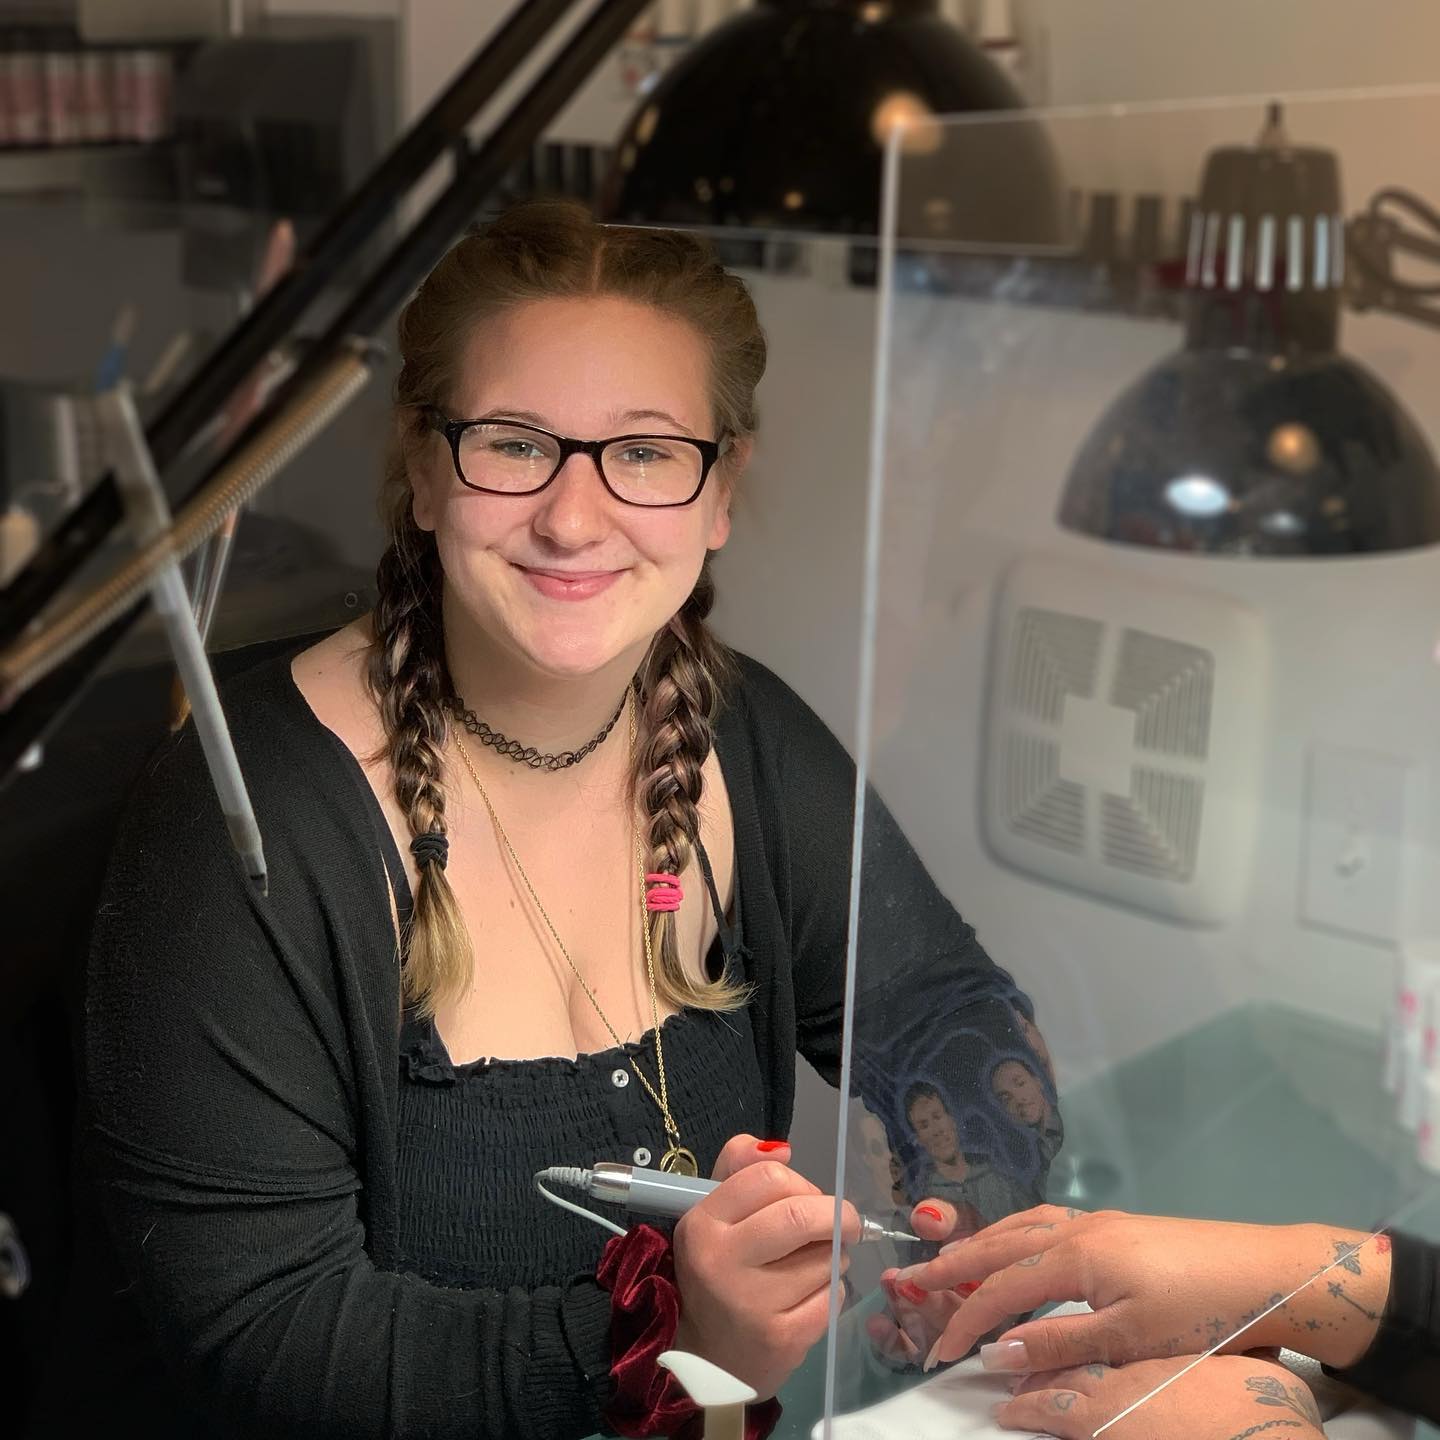 Welcome Joyce! Our new nail tech taken over Pattys maternity leave! 

Joyce has enjoyed doing nails for quite some time! Her bubbly personality is contagious, you’ll enjoy your nail services while she’s here! 

Call to book your appointments now! 302-658-0842